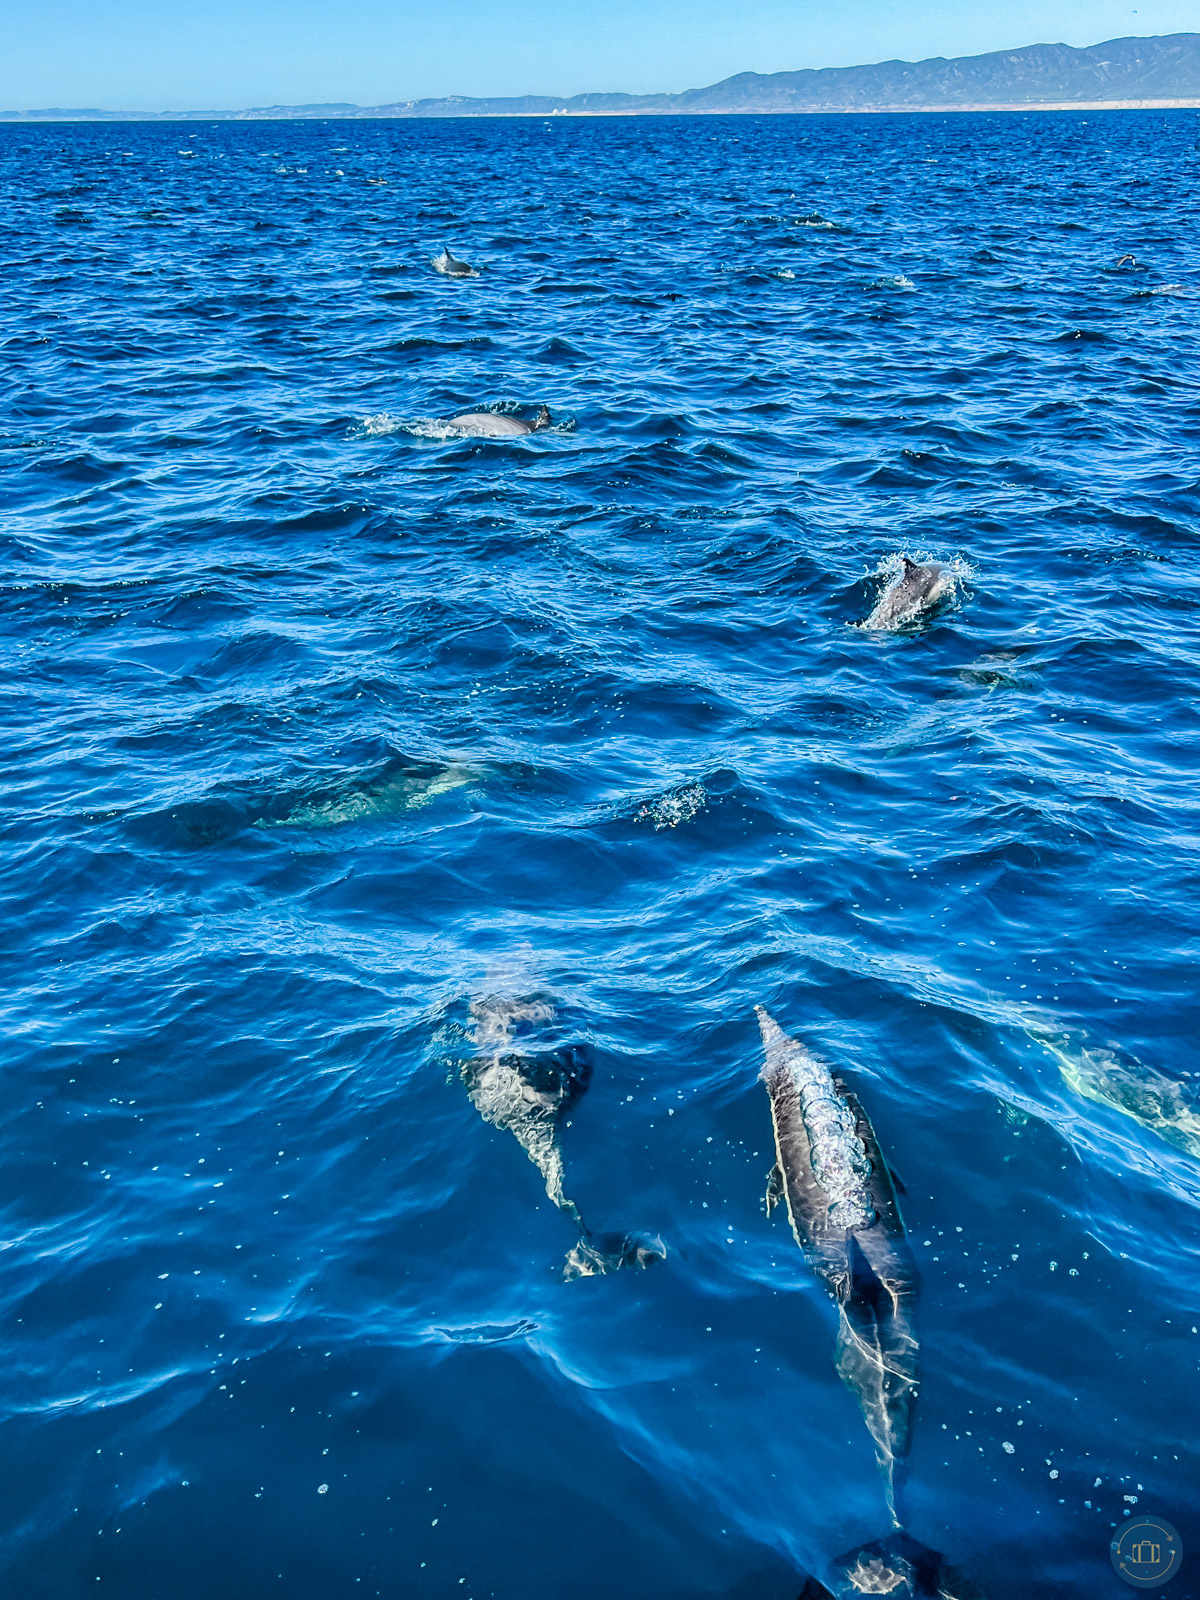 Dolphins in ocean seen during whale watching trip from oceanside california